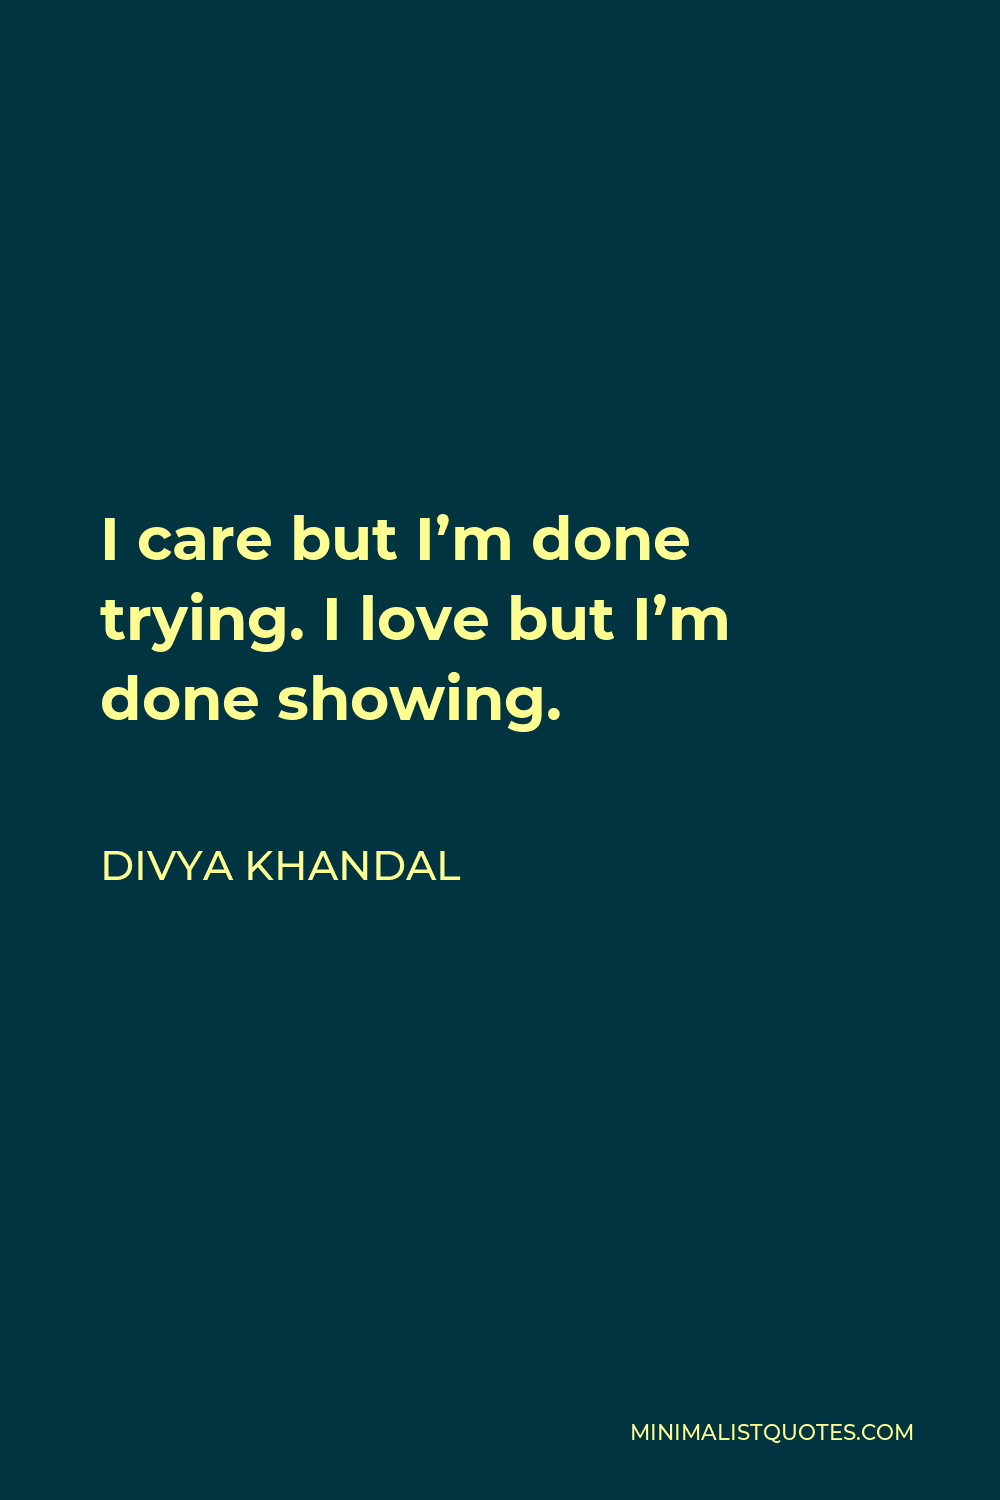 Divya khandal Quote - I care but I’m done trying. I love but I’m done showing.